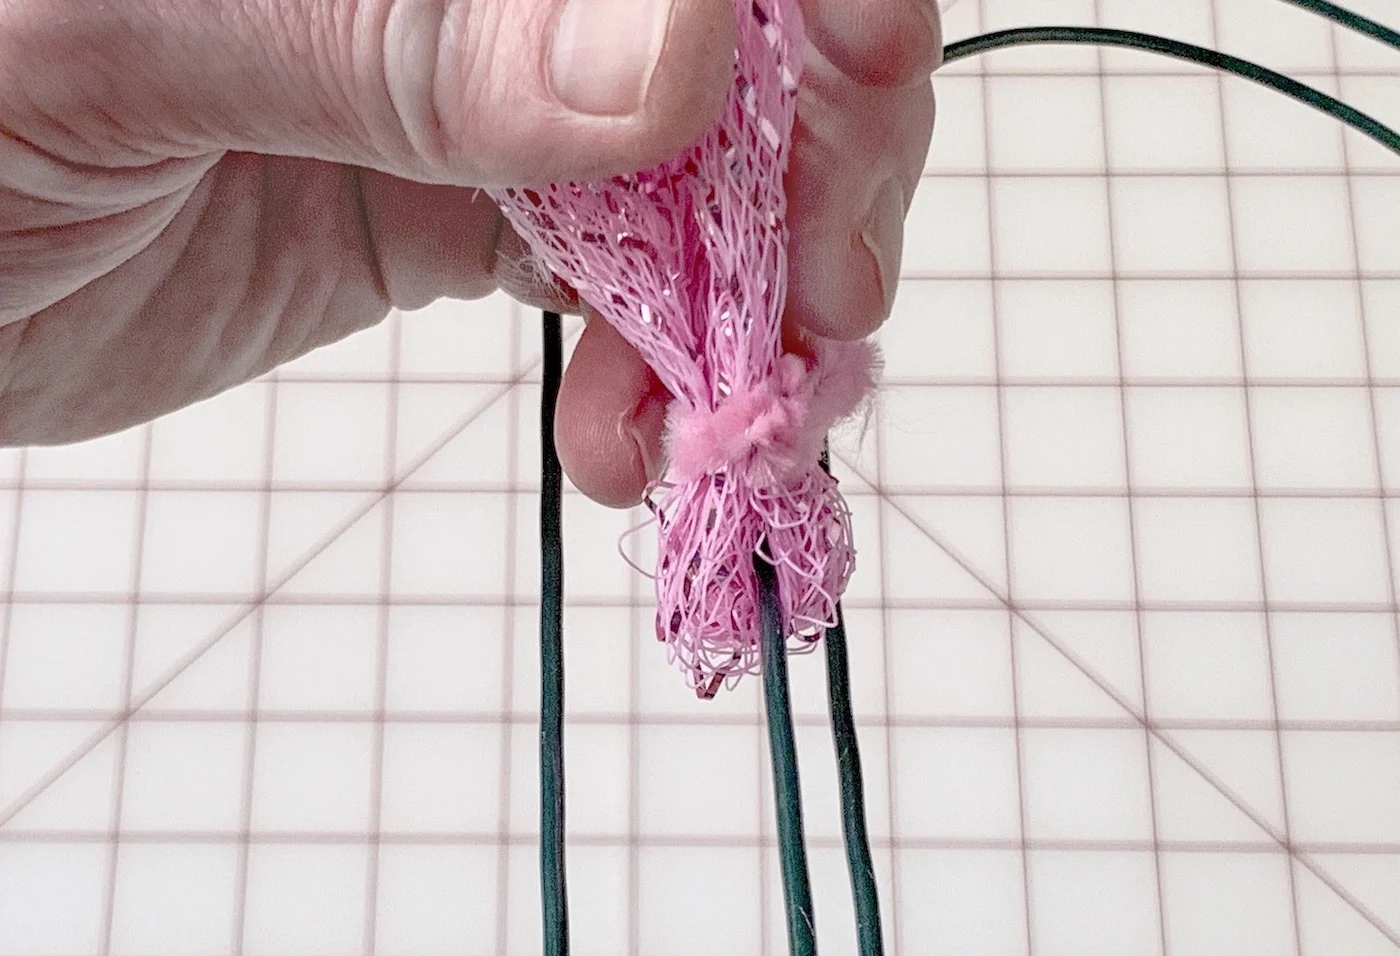 Wrapping a pipe cleaner around the folded mesh